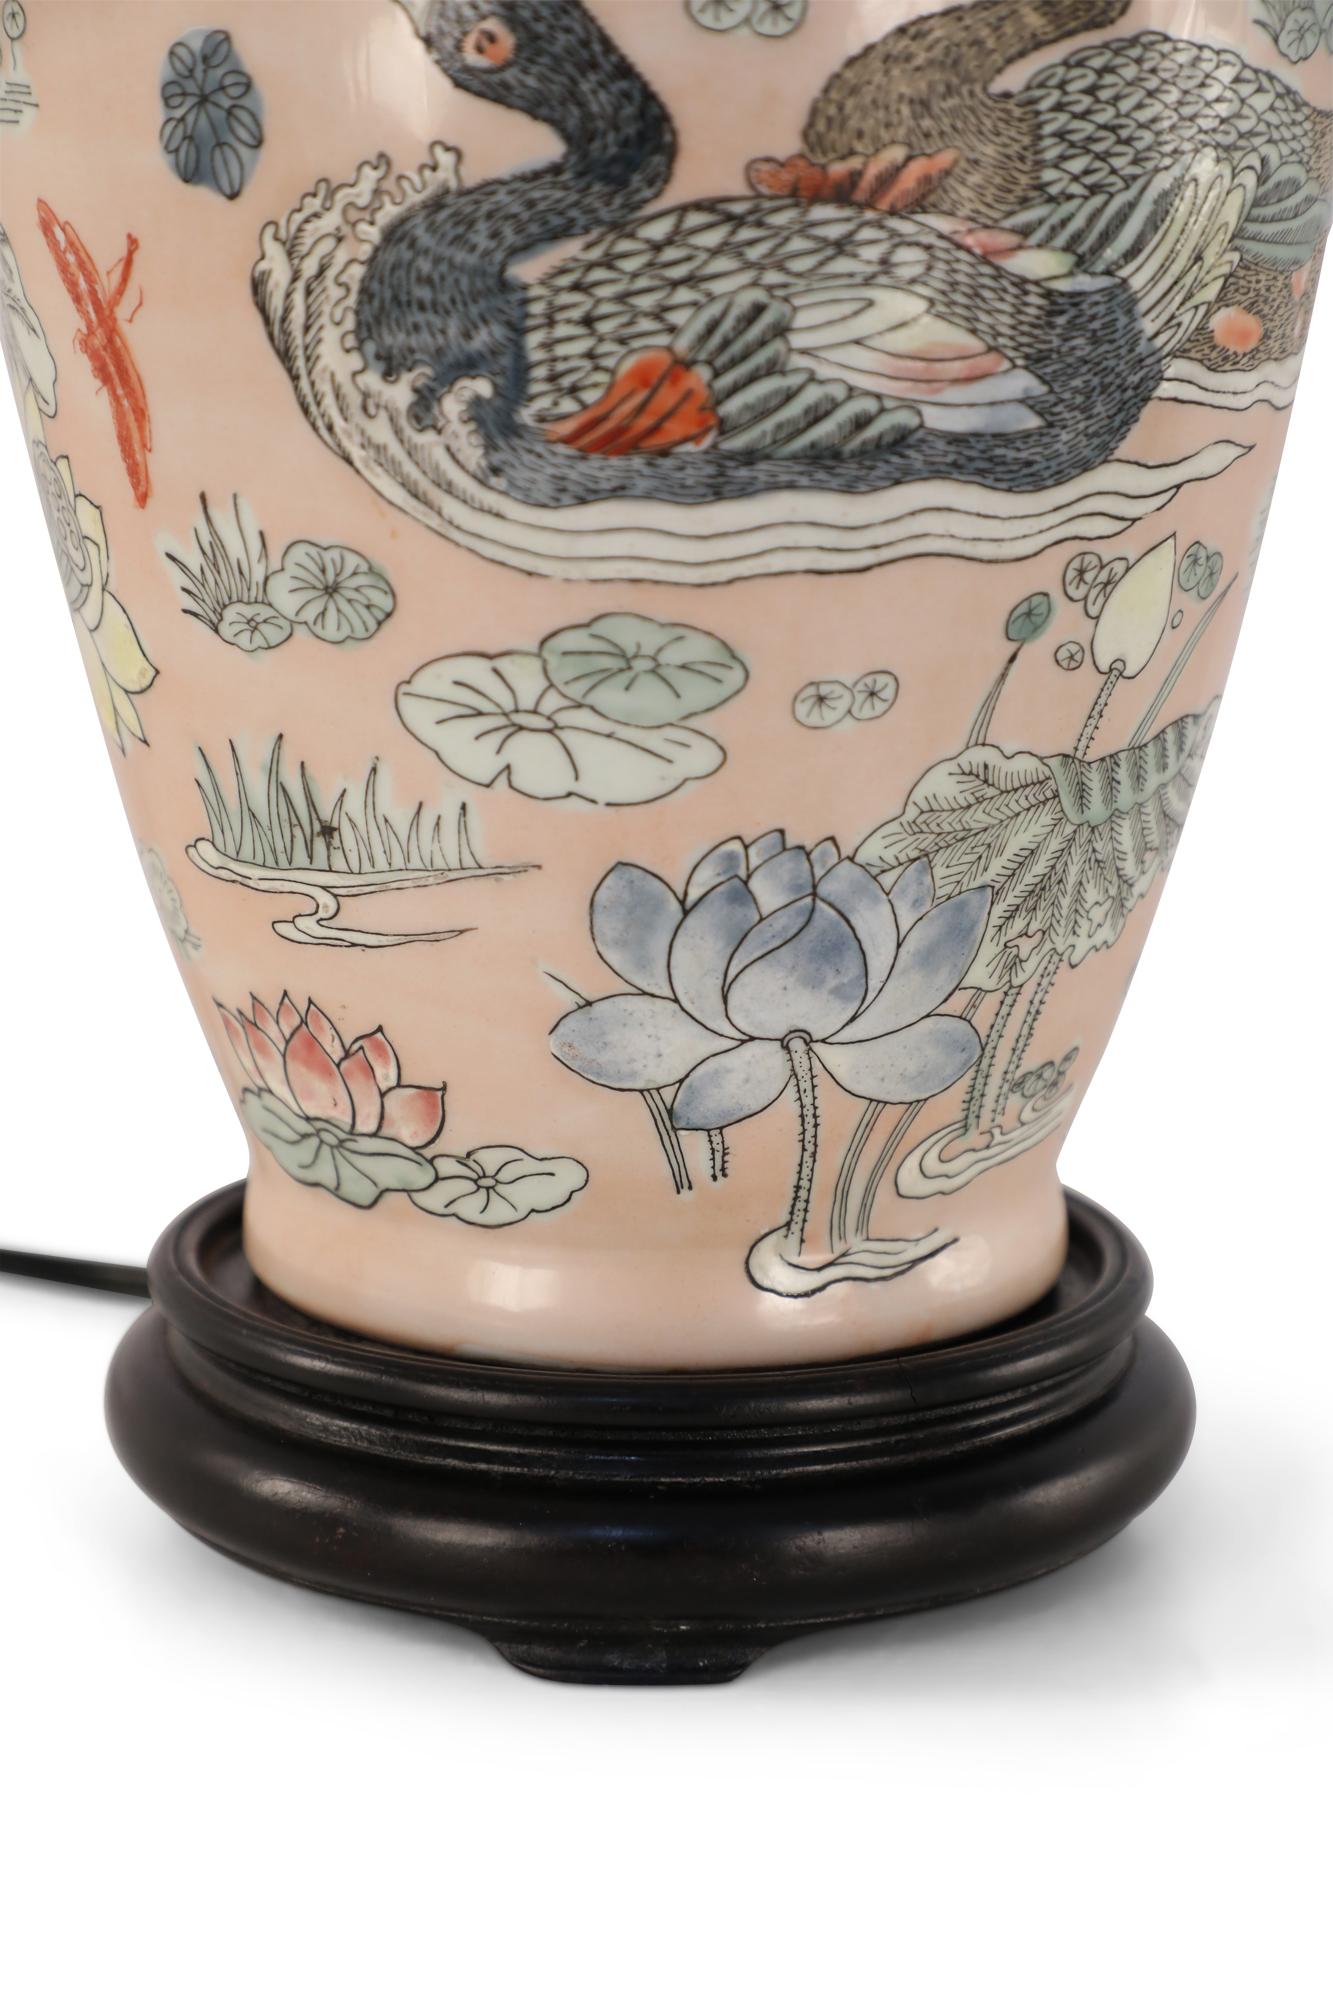 Ceramic Chinese Pink Floral Baluster-Shaped Table Lamp with Ducks For Sale